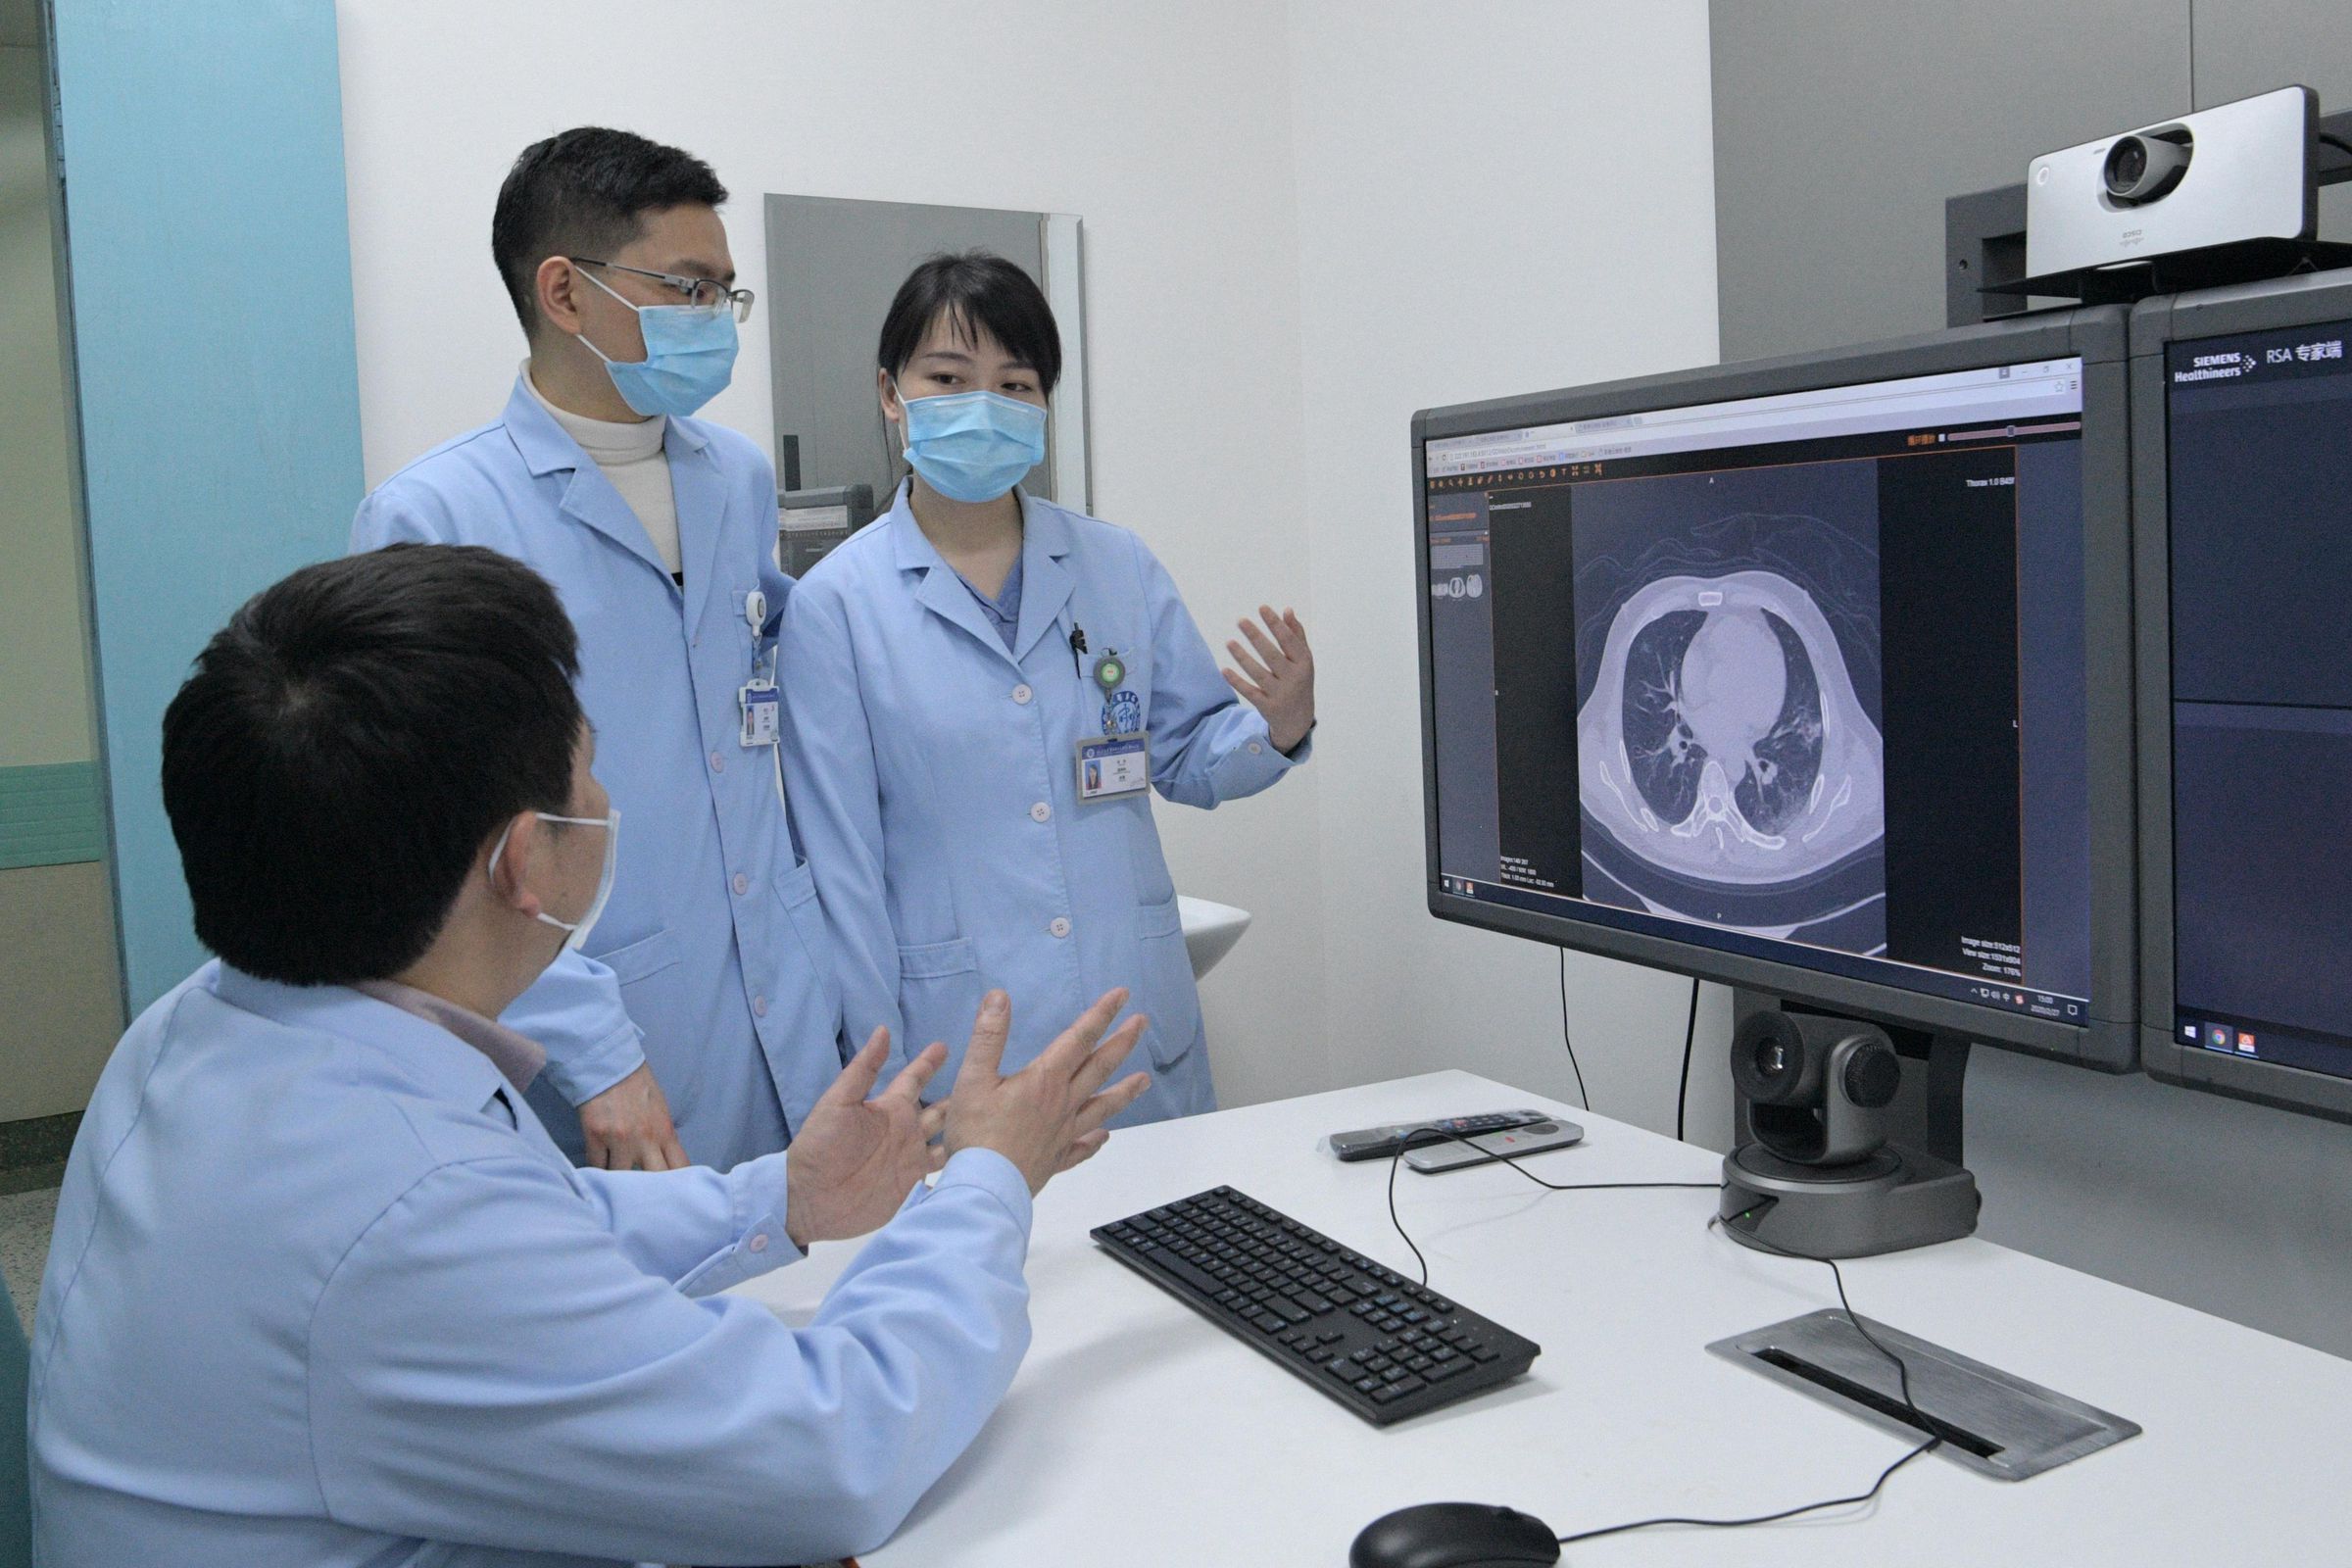 5G-aided Remote CT Scans Used To Diagnose COVID-19 Patients In China